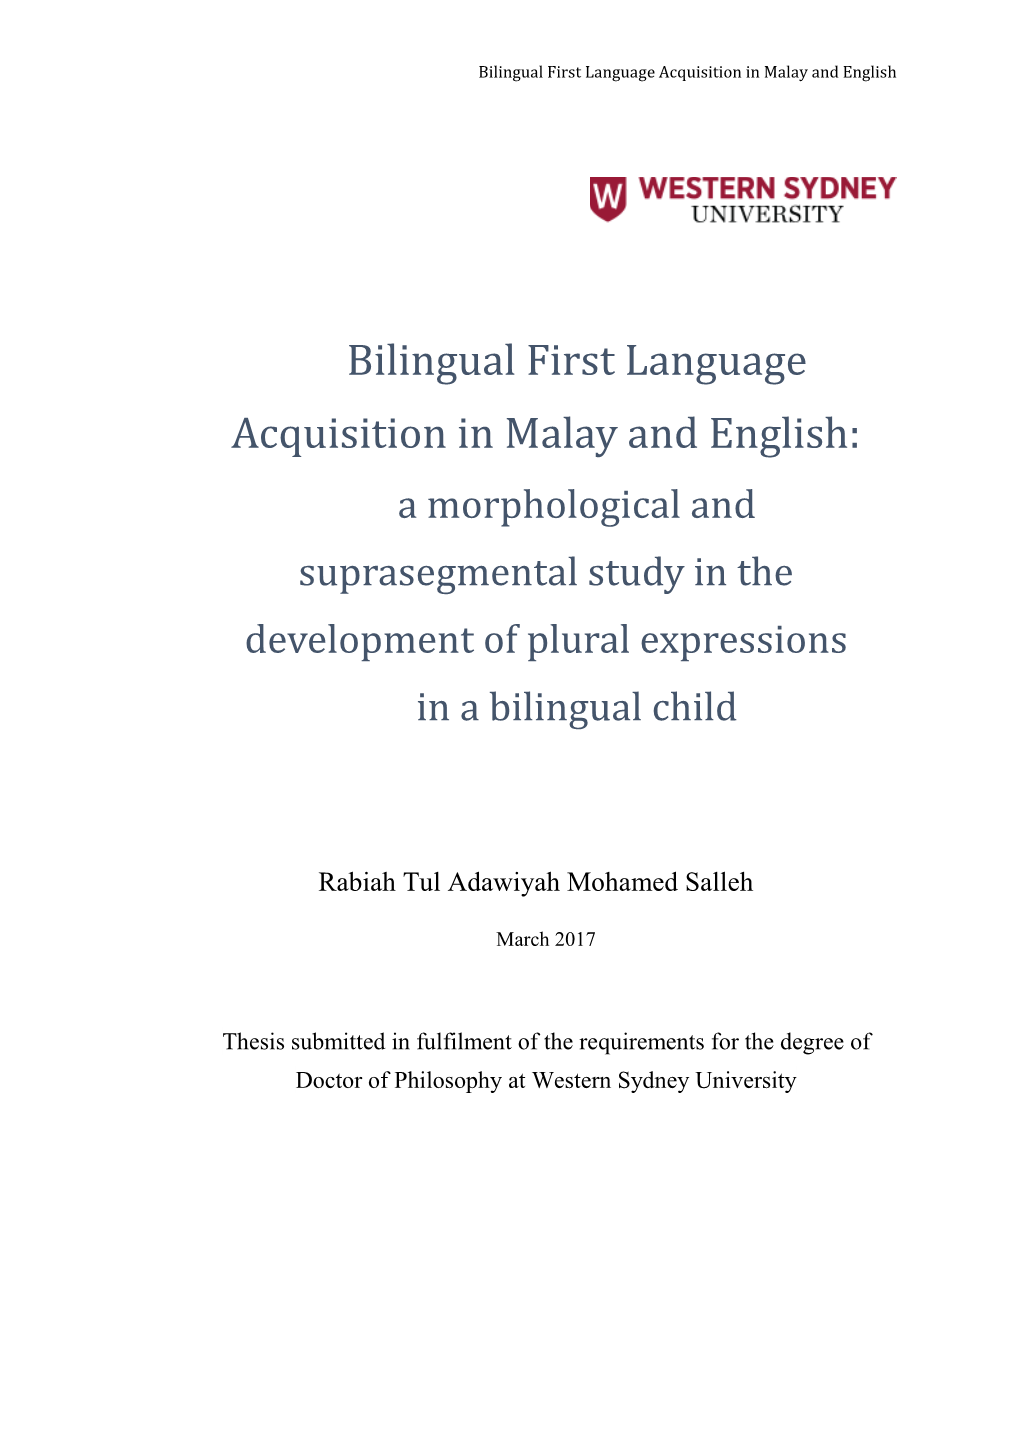 Bilingual First Language Acquisition in Malay and English: a Morphological and Suprasegmental Study in the Development of Plural Expressions in a Bilingual Child